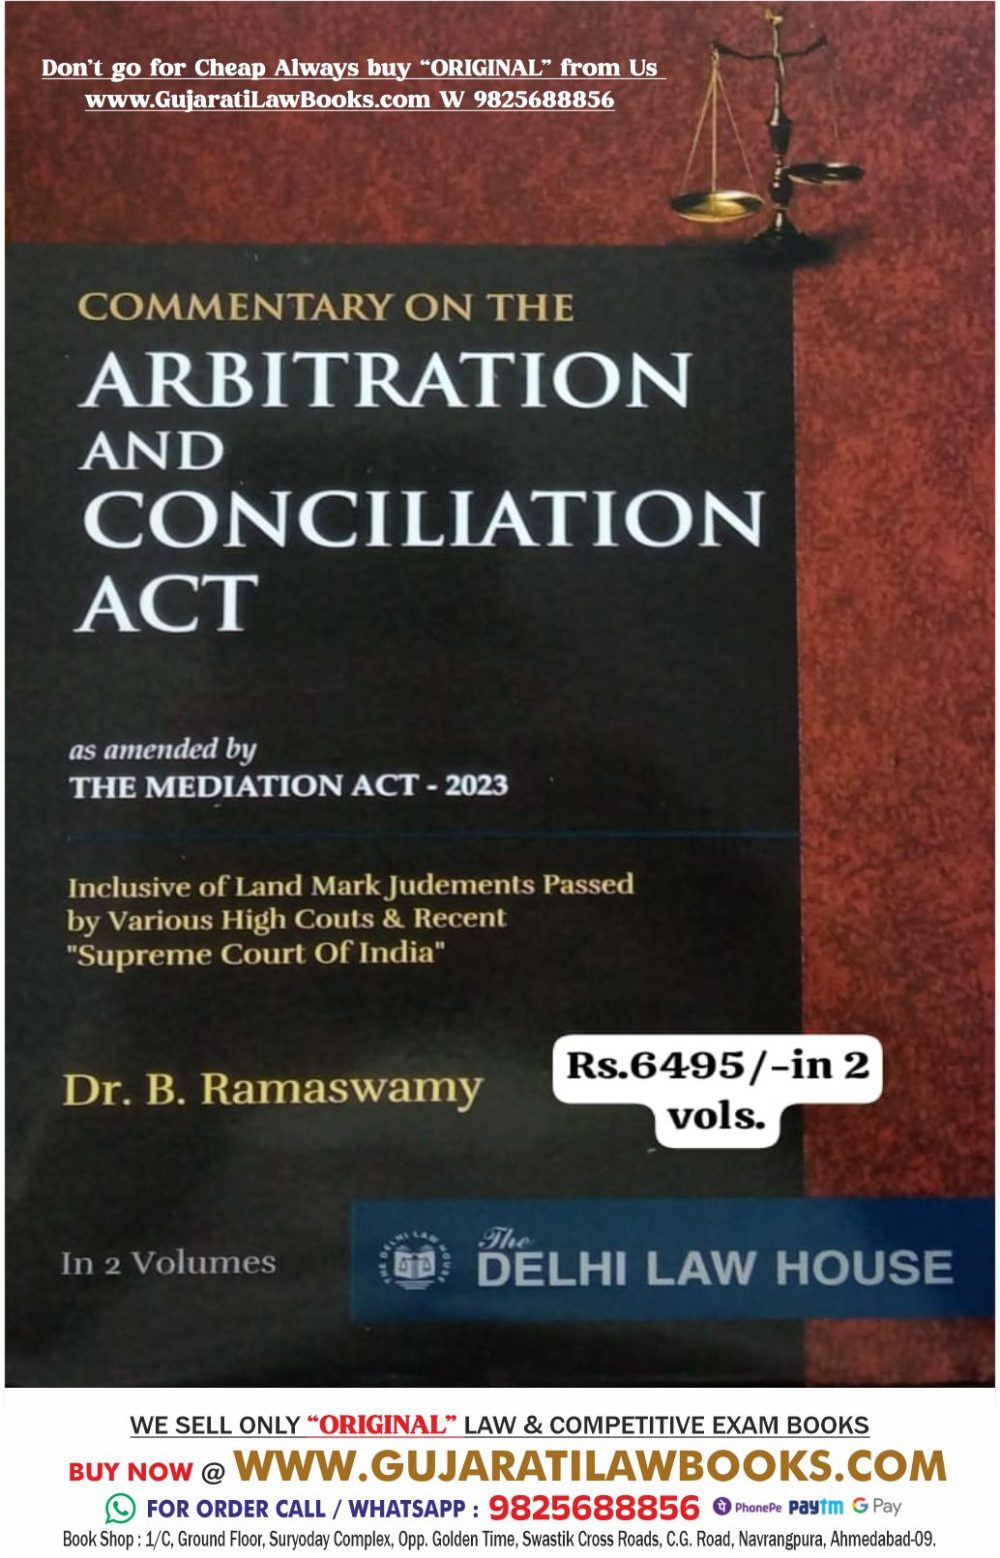 Commentary on THE ARBITRATION AND CONCILIATION ACT by Dr. B Ramaswamy (In 2 Volumes) Latest 2024 Edition Delhi Law House